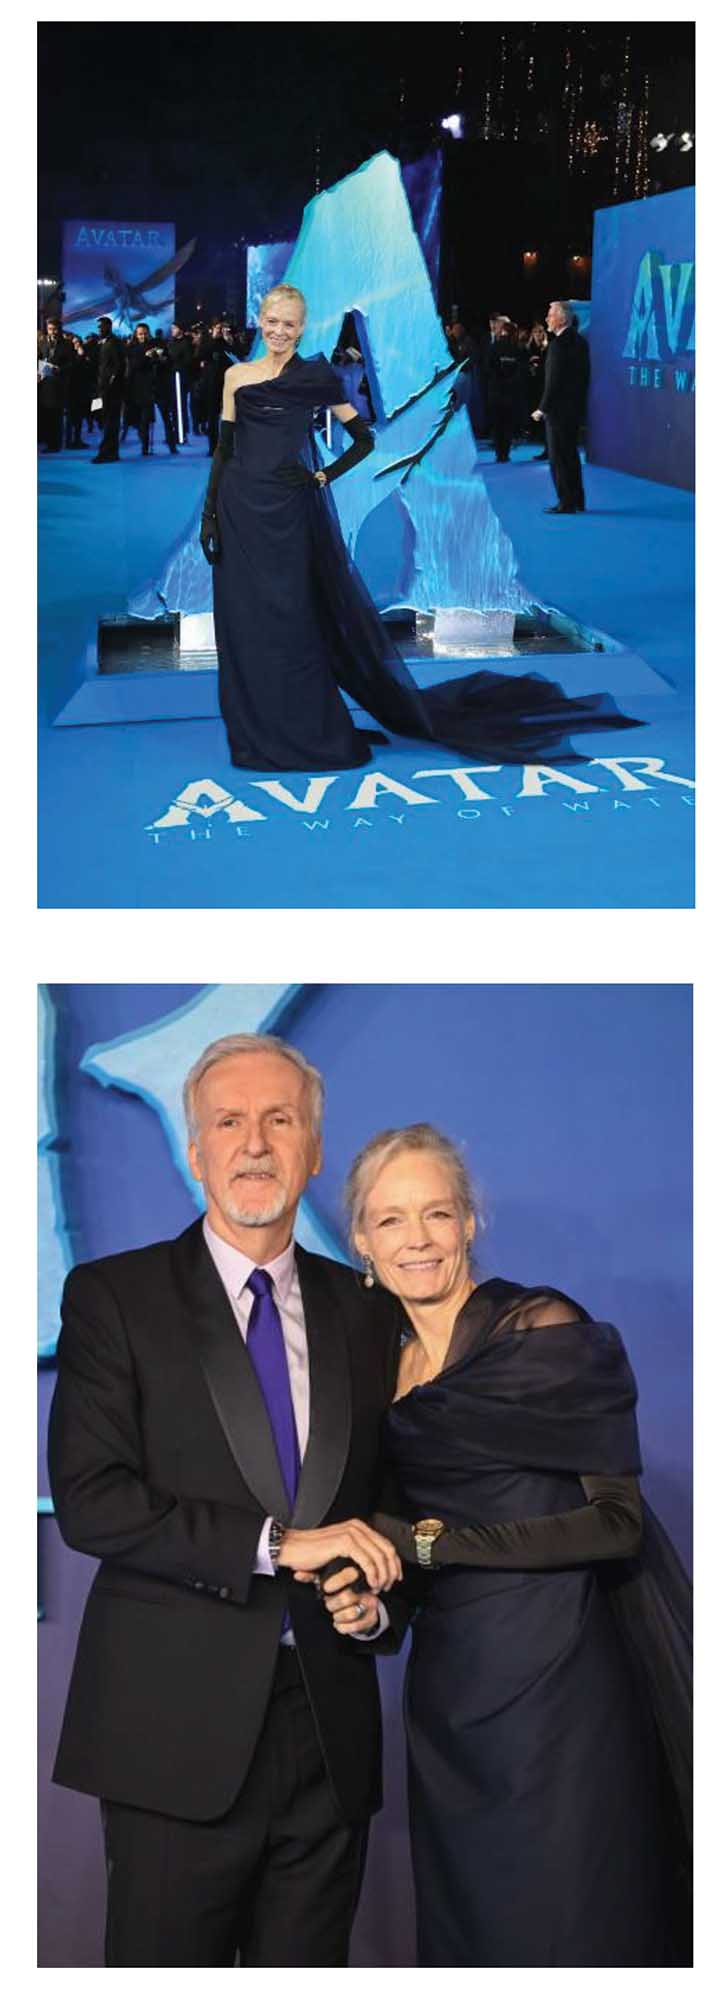 Hollywood power couple James Cameron (left) and Suzy Amis Cameron (right) in bespoke looks by Huntsman and Vivienne Westwood made of TENCEL™ branded lyocell fibers at the London premiere of AVATAR: The Way of Water. Suzy Amis Cameron’s dress is made of fabric with 58% TENCEL™ Lyocell and 42% Acetate.James Cameron’s suit is fabric made of 100% TENCEL™ Lyocell. Getty Images/ RCGD Global